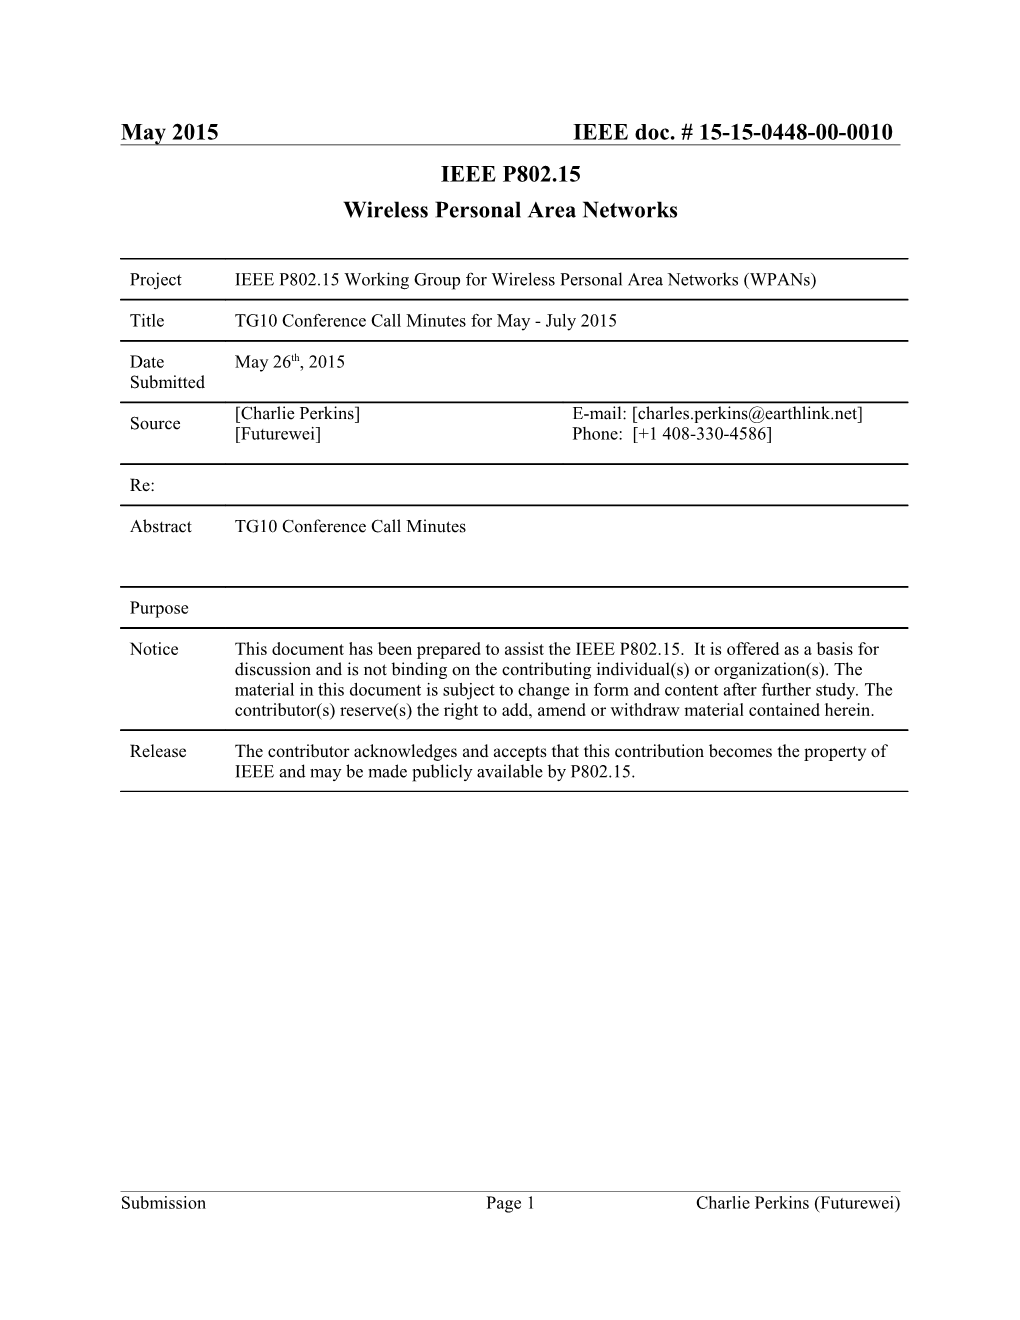 Wireless Personal Area Networks s5